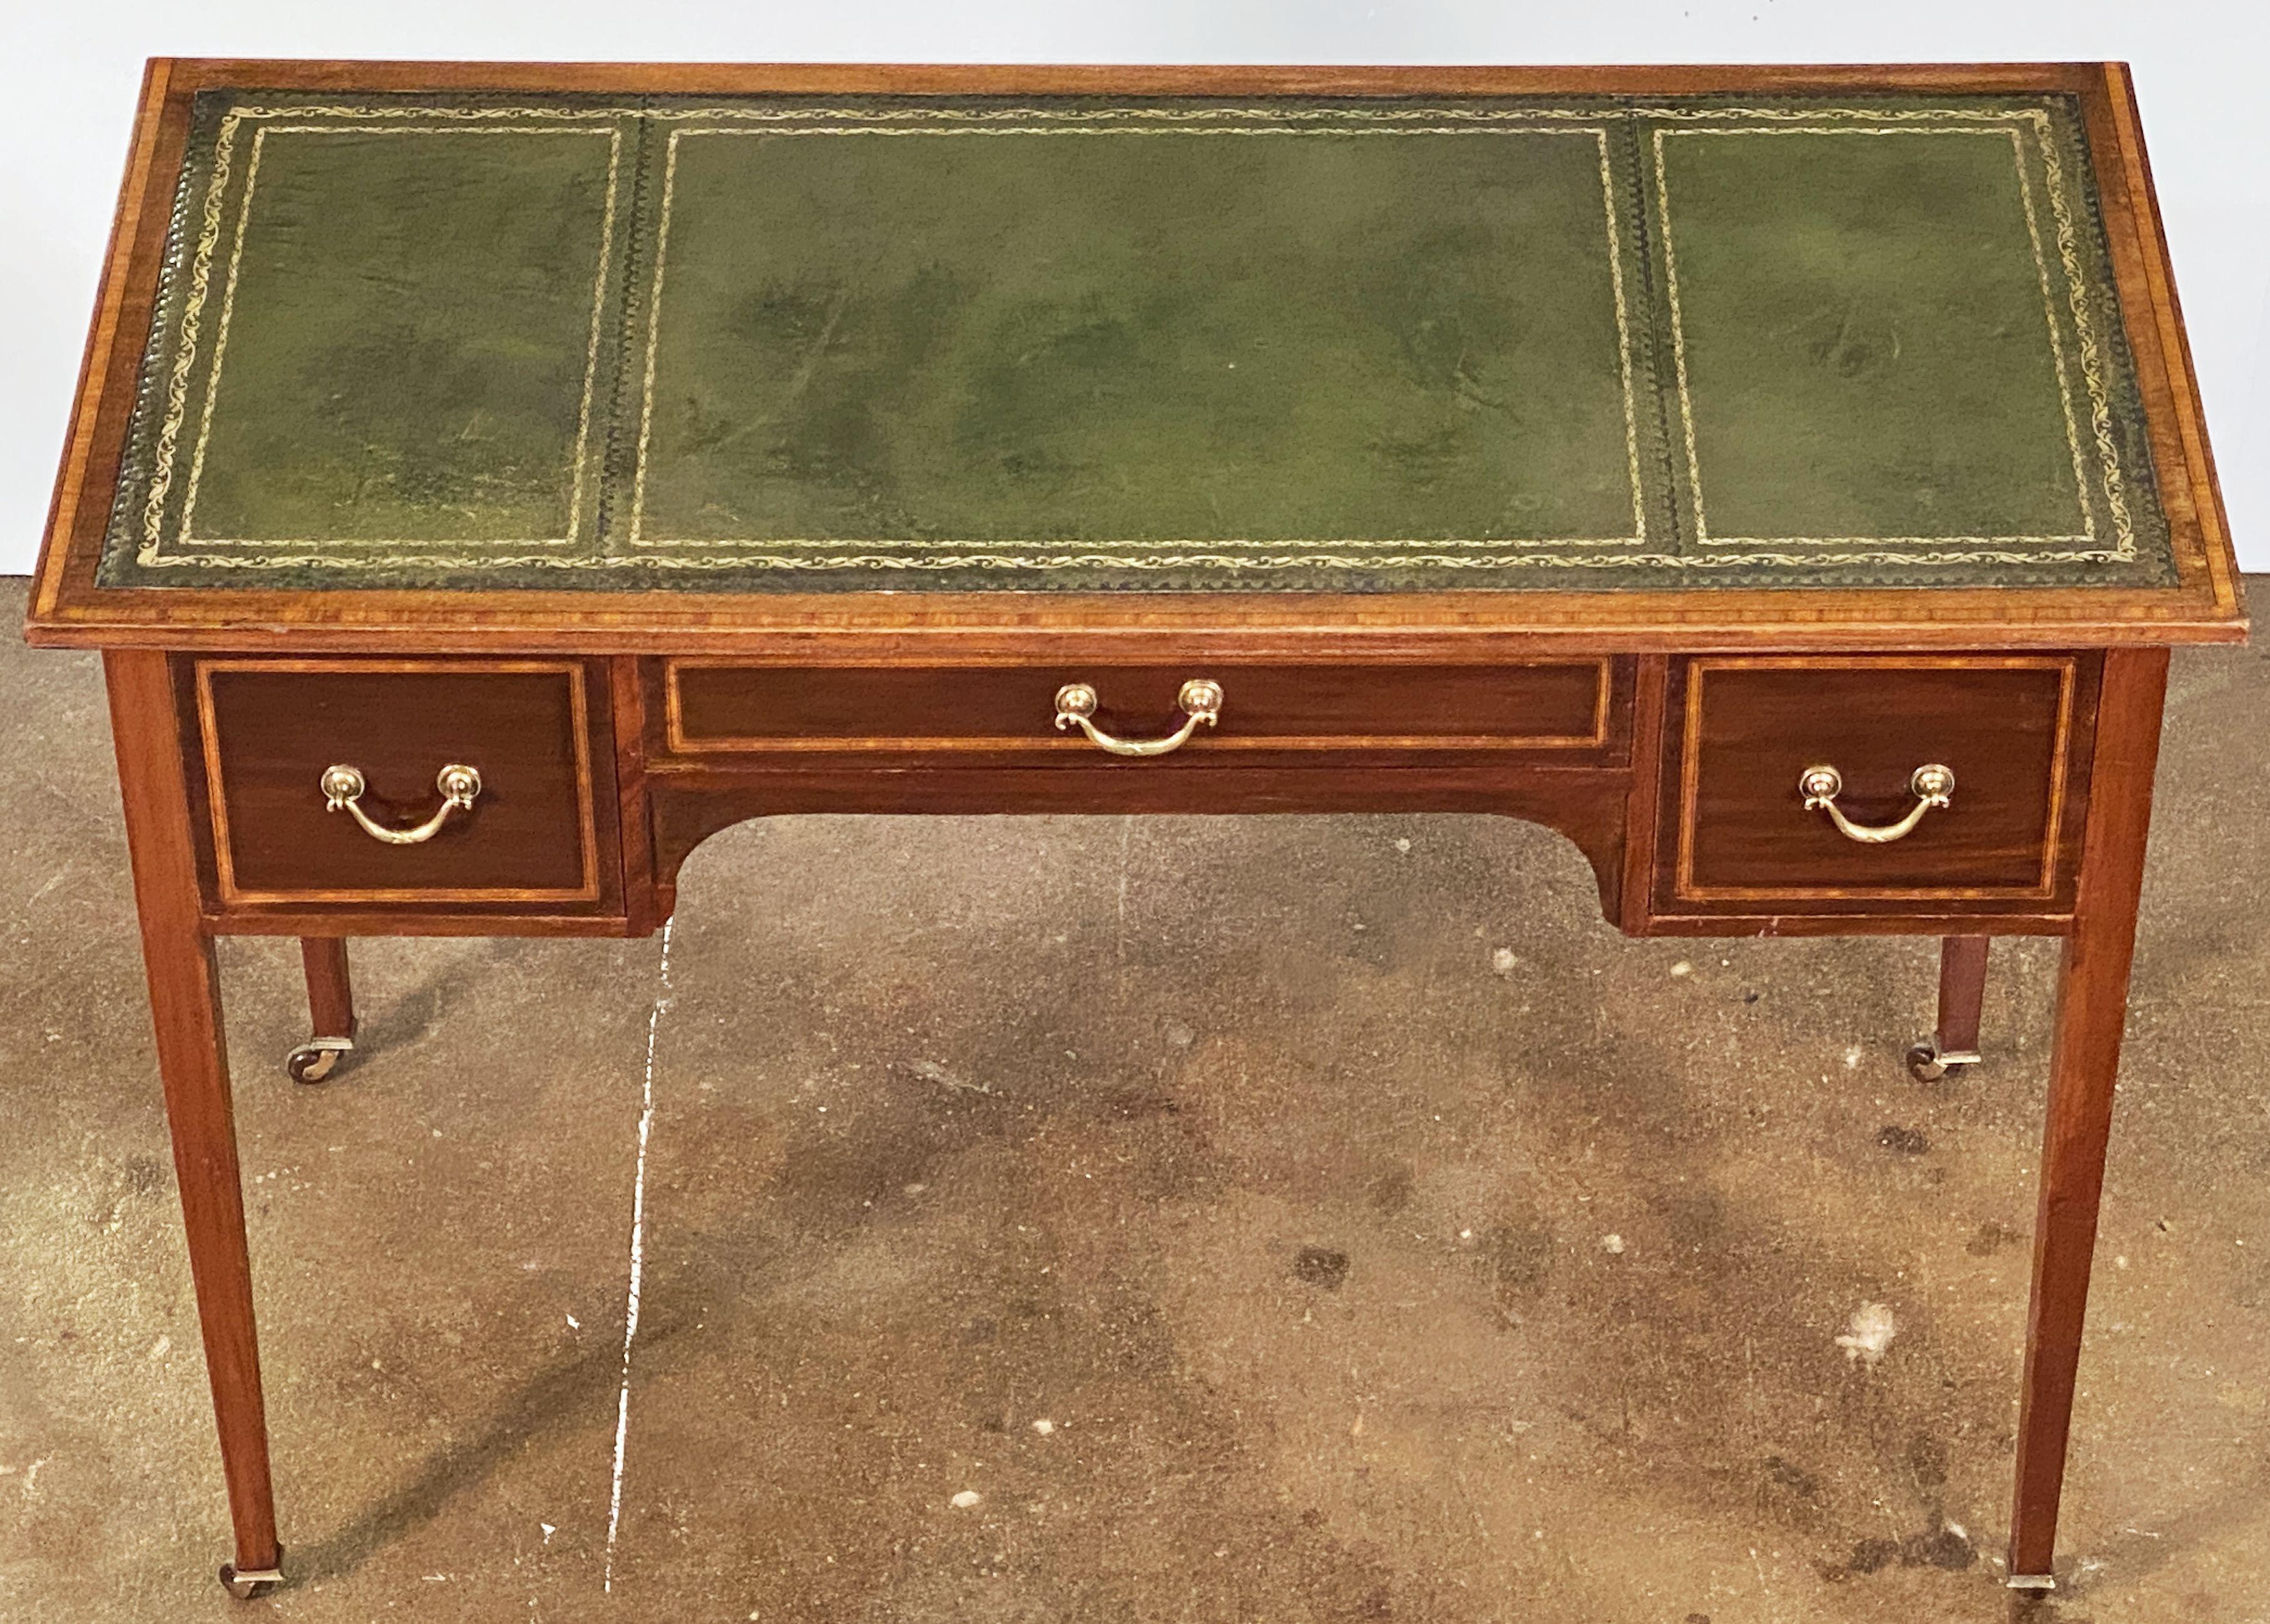 Metal English Writing Table or Desk of Inlaid Mahogany with Embossed Leather Top